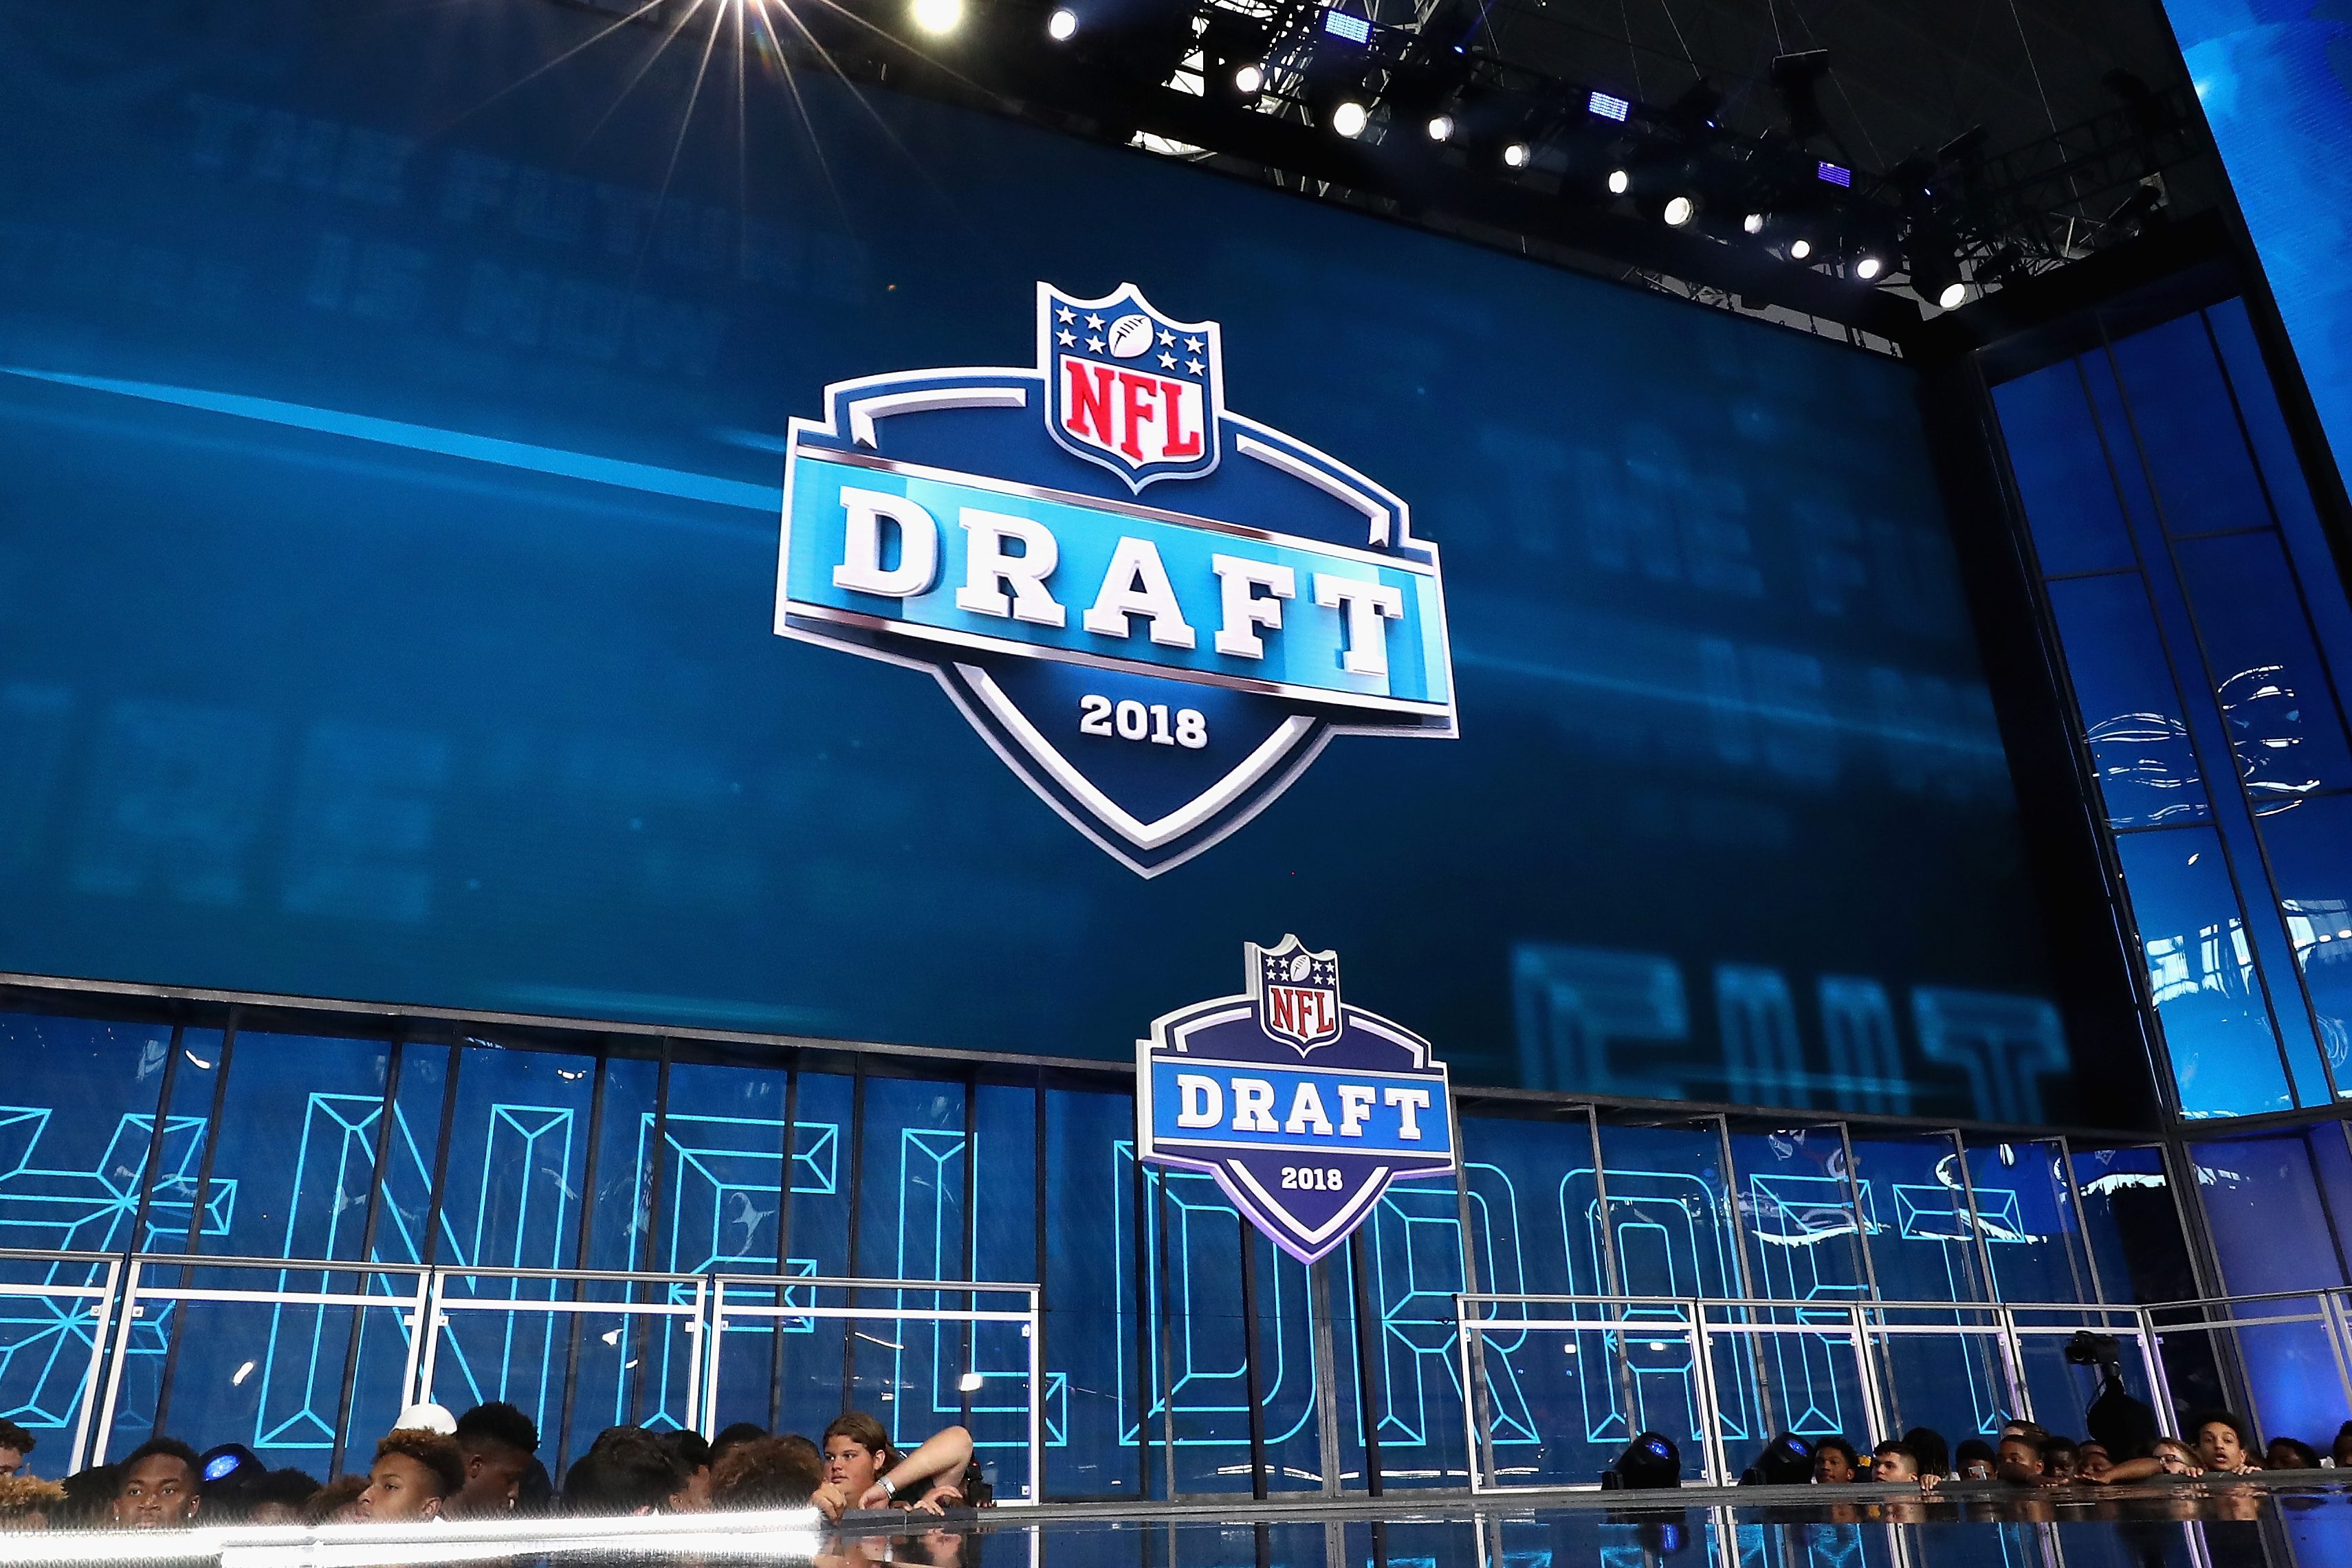 The 2018 NFL Draft logo is seen on a video board. (Ronald Martinez/Getty)